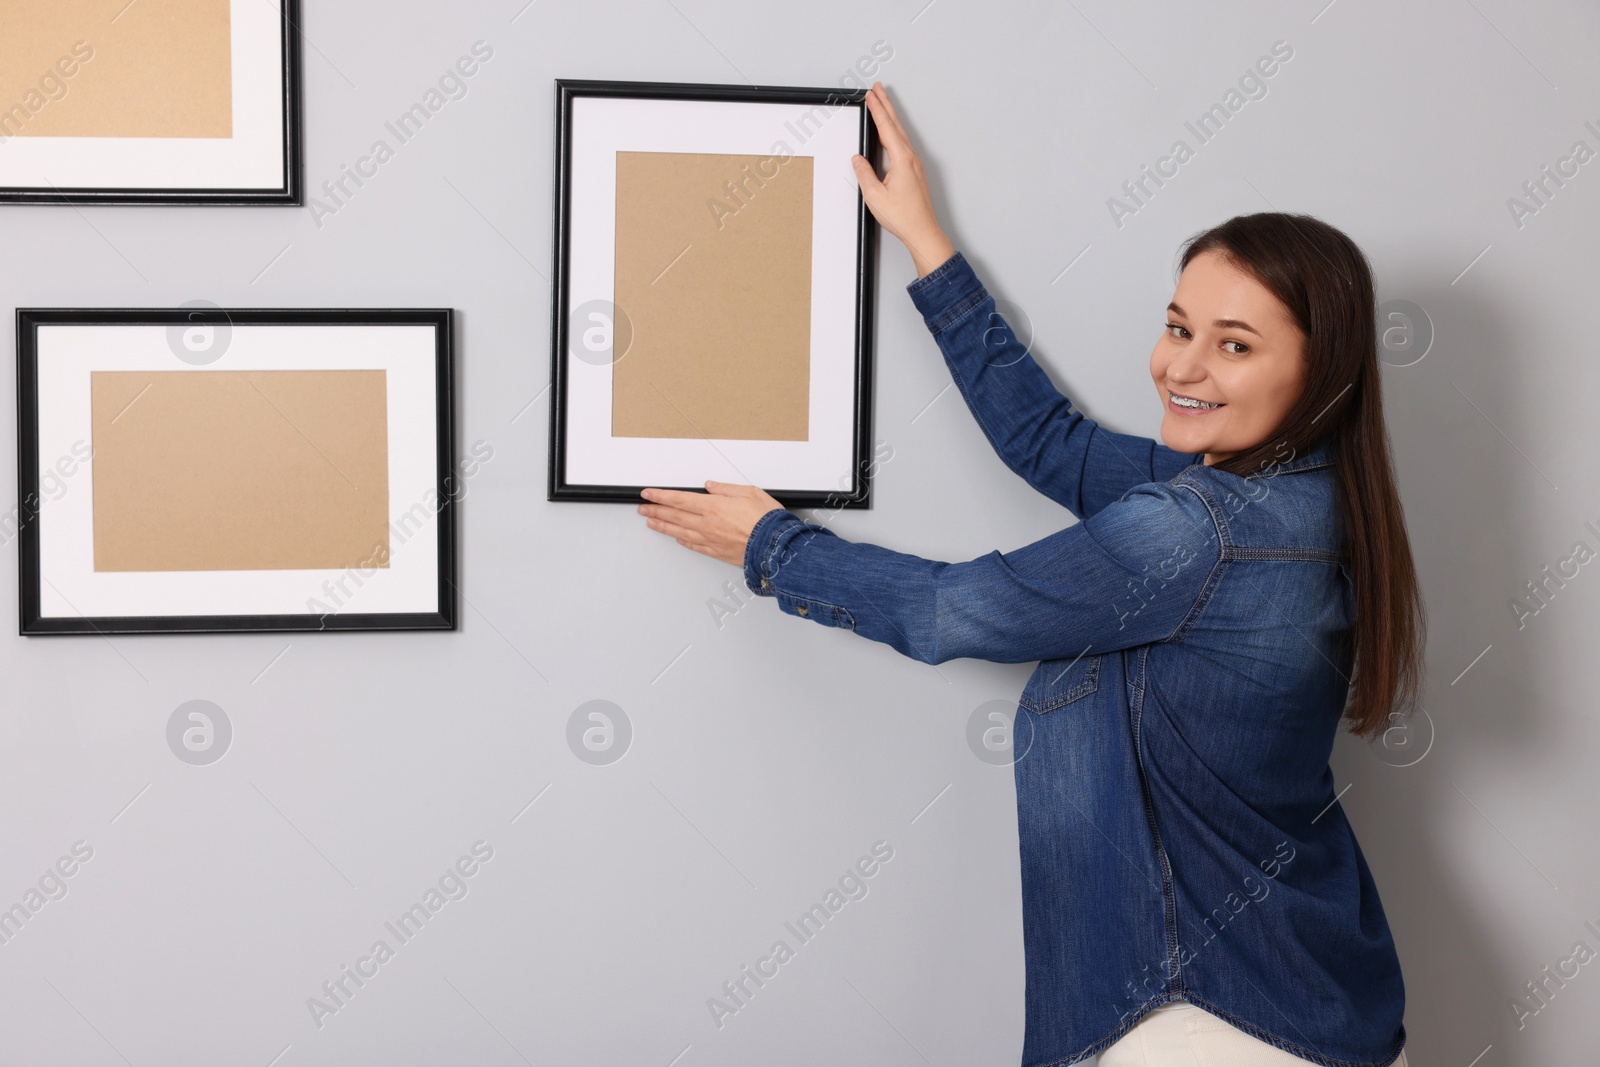 Photo of Woman hanging picture frame on gray wall